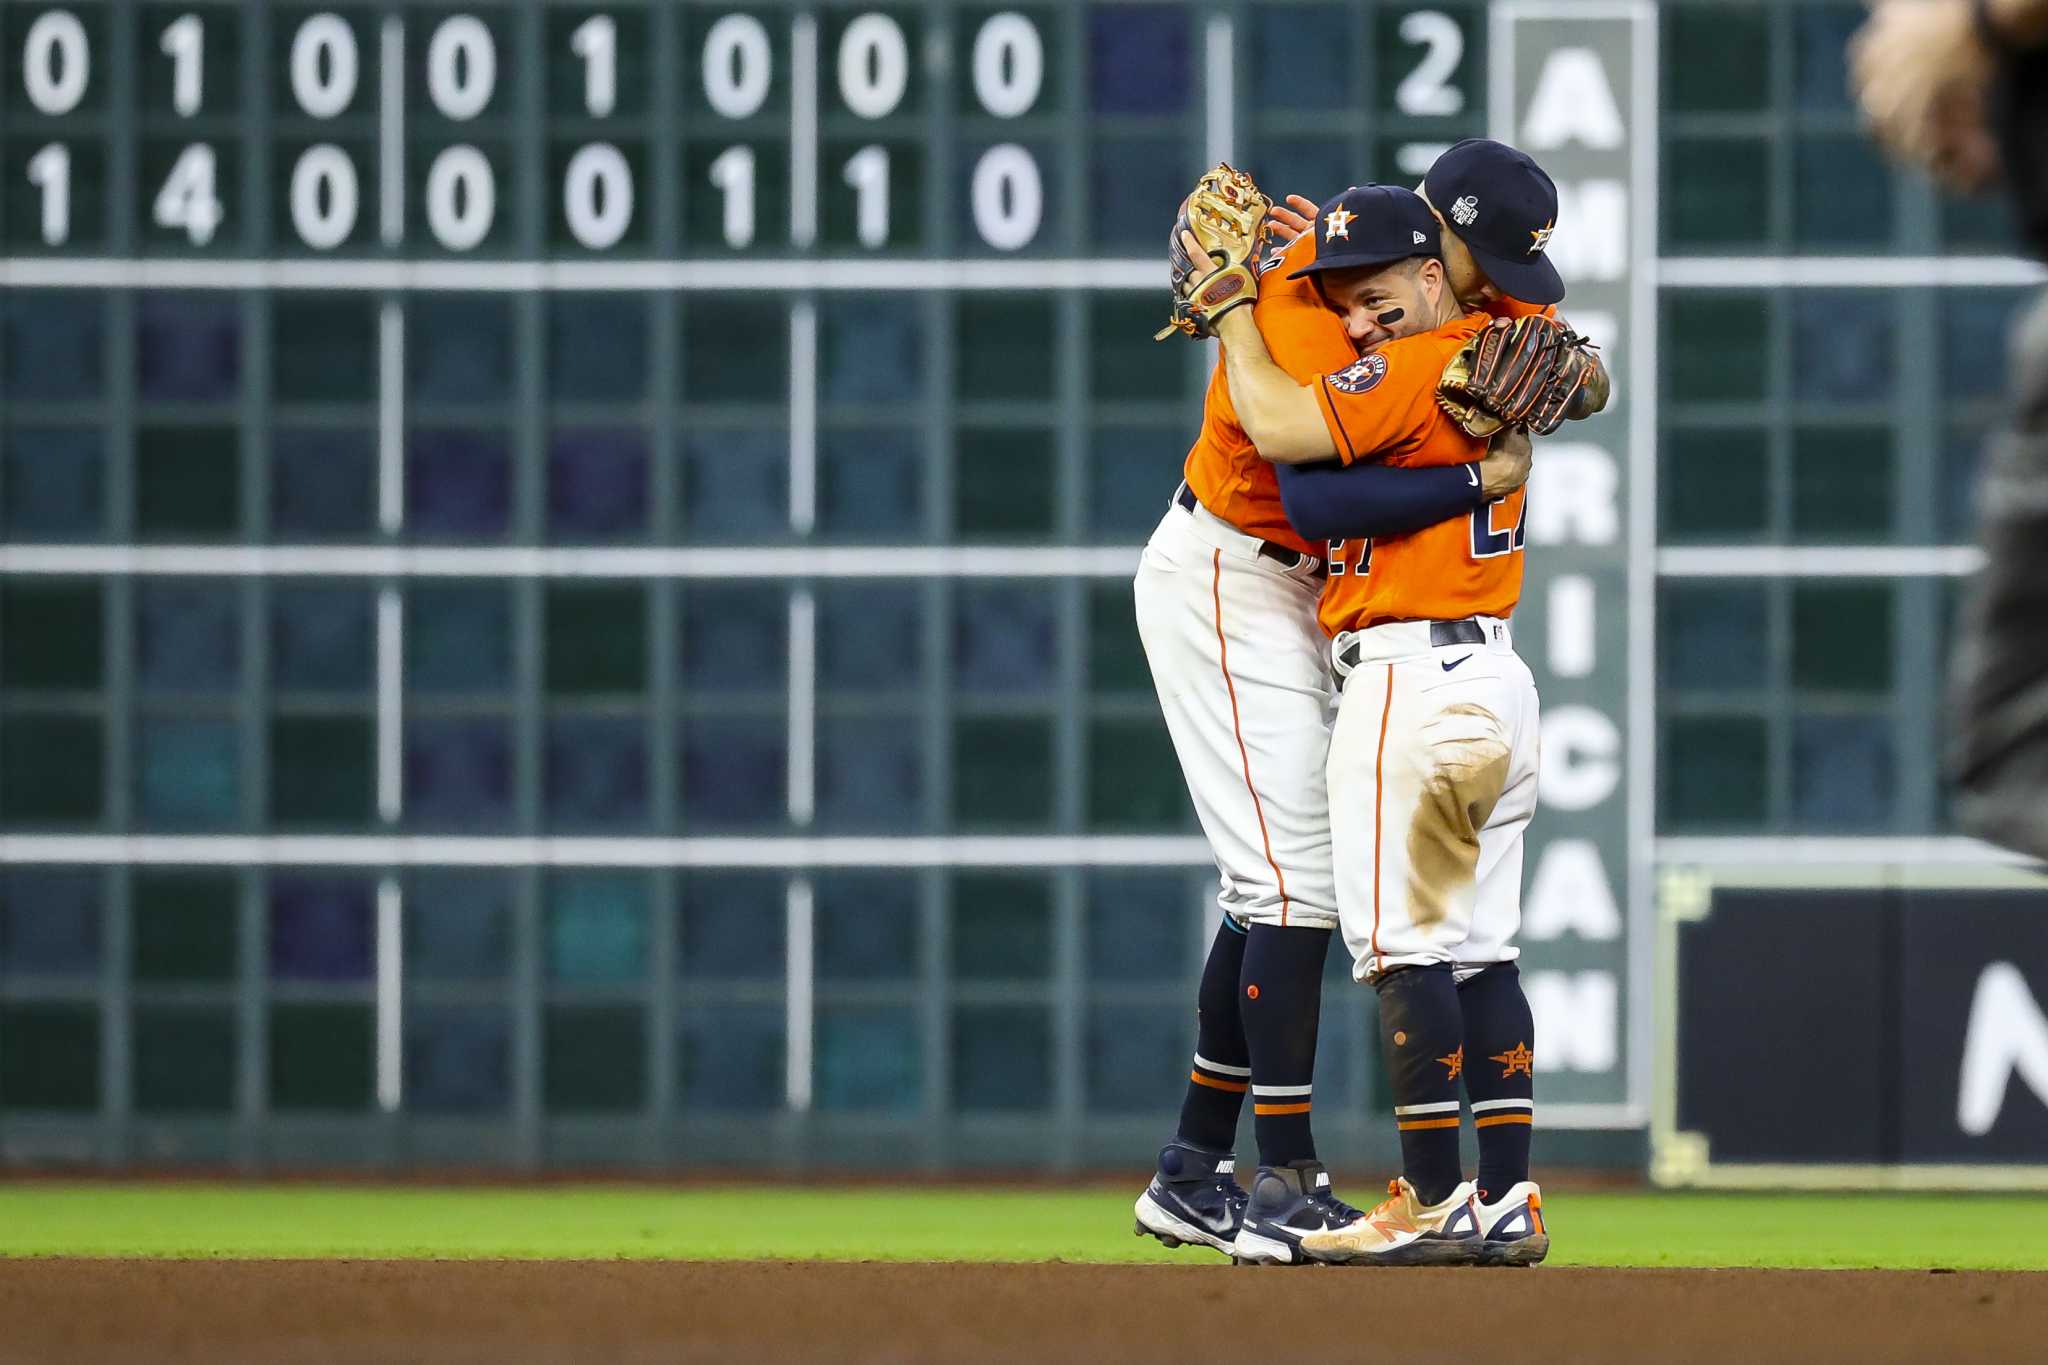 Astros' Jose Altuve's postgame hug tradition continues with rookie